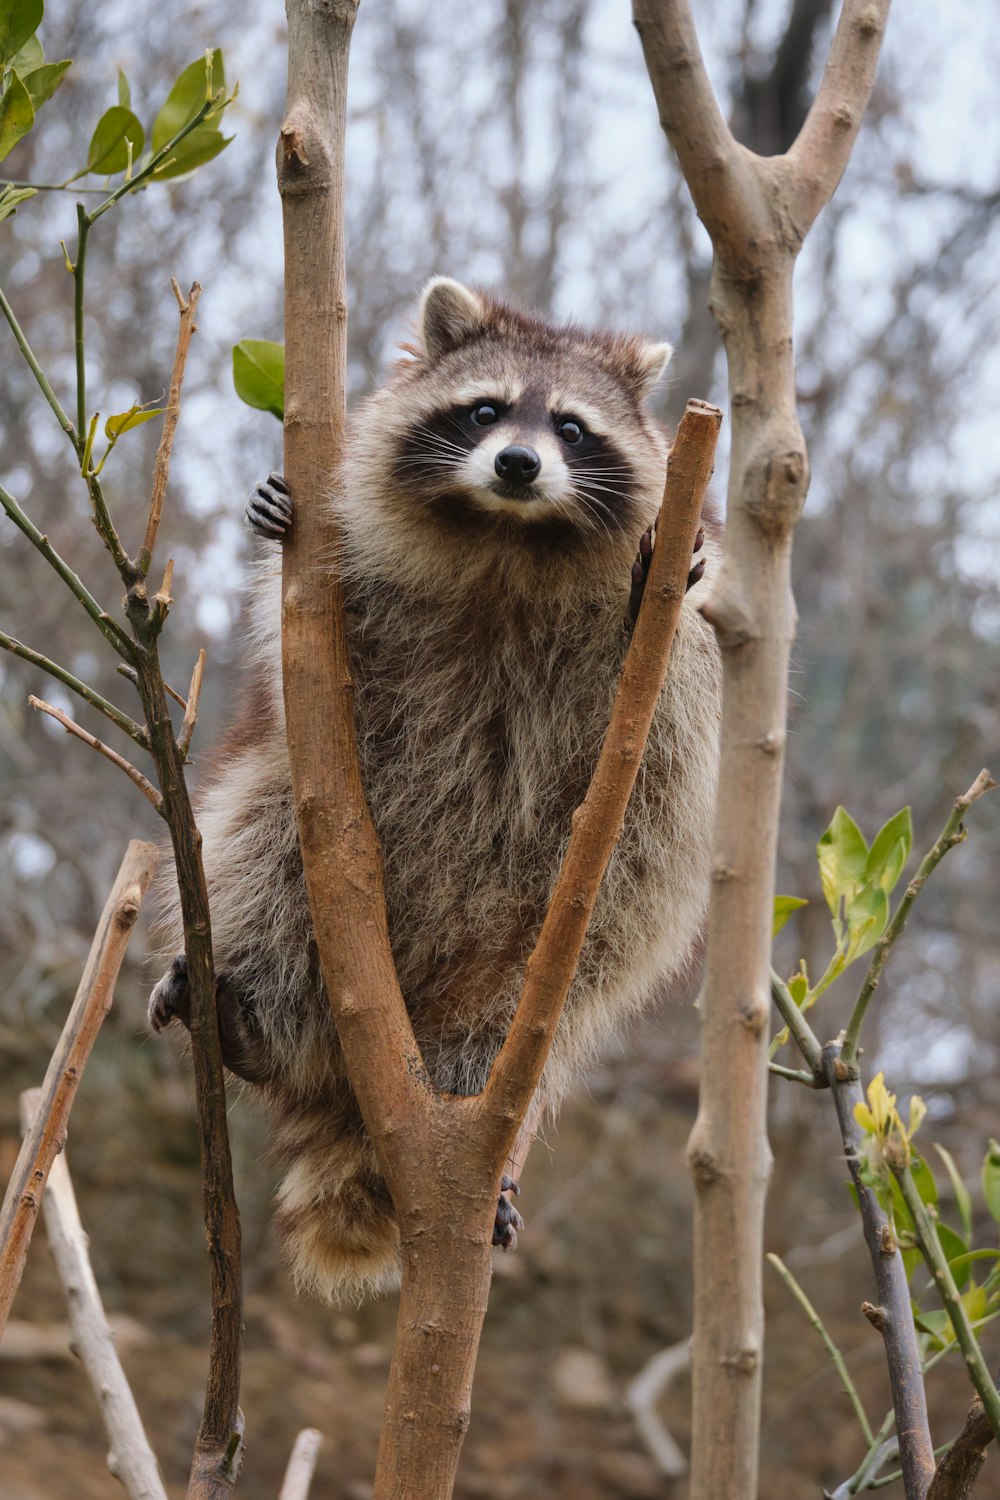 a raccoon climbing a tree branch in a forest